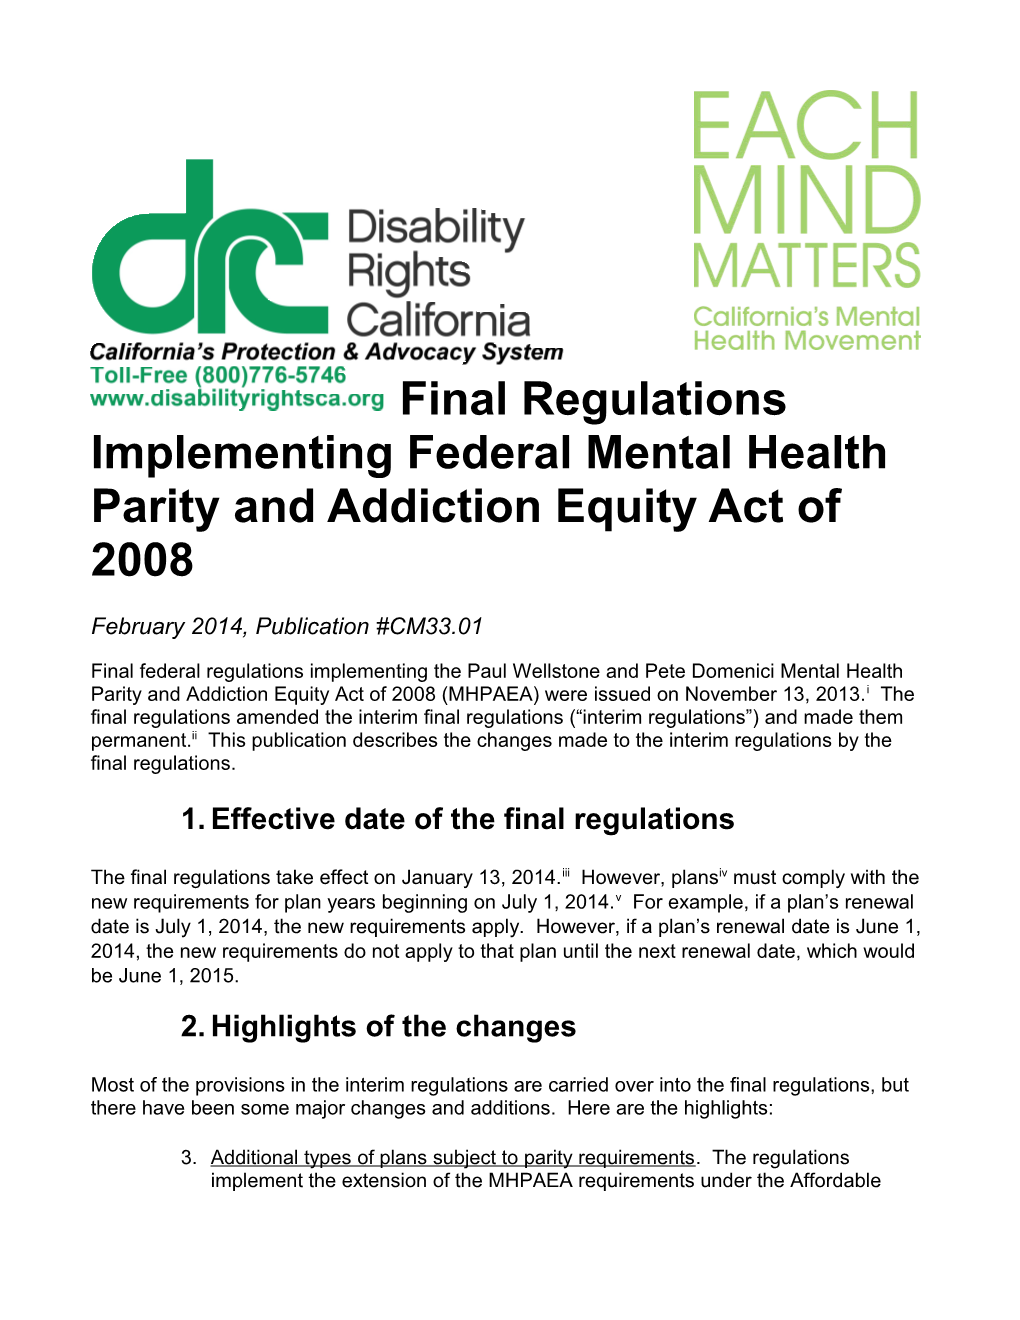 Final Regulations Implementing Federal Mental Health Parity and Addiction Equity Act of 2008